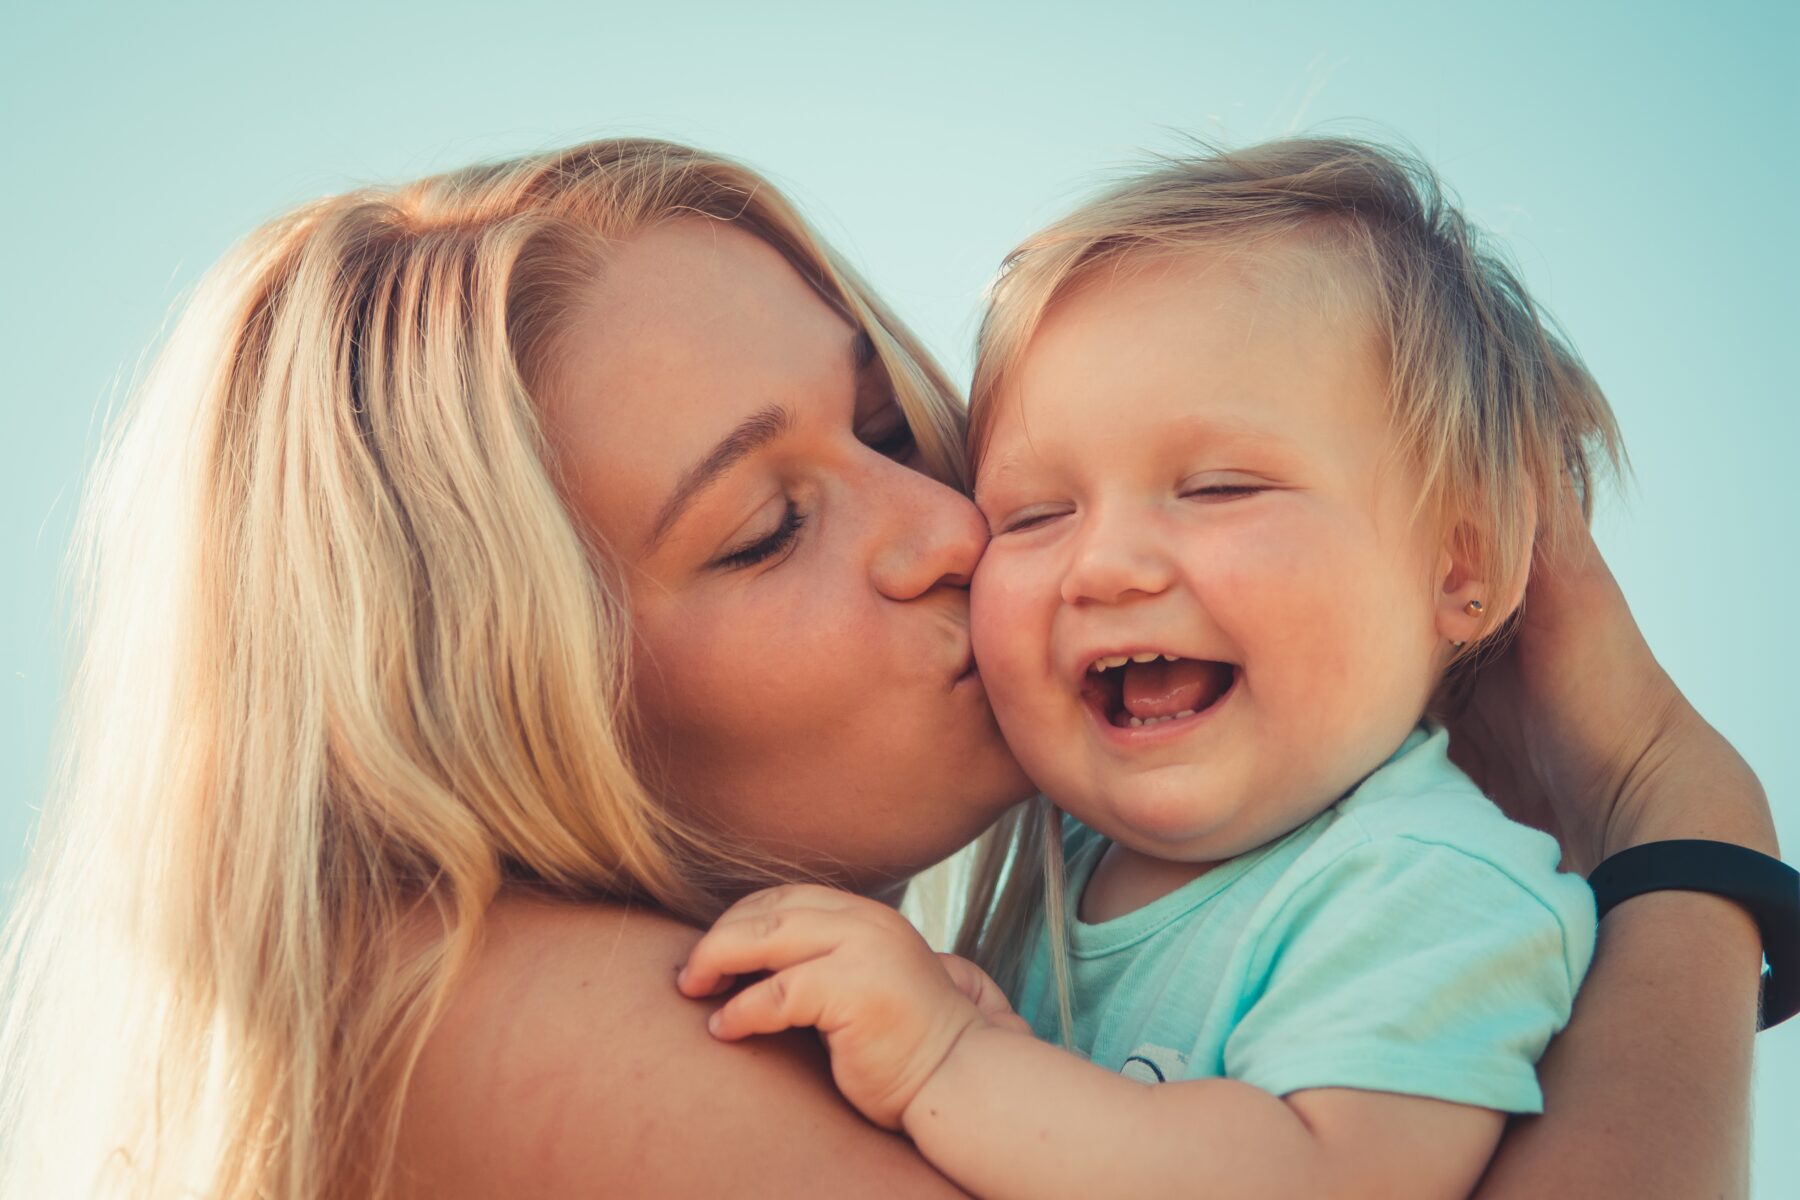 A blonde woman kisses the cheek of a smiling young boy.